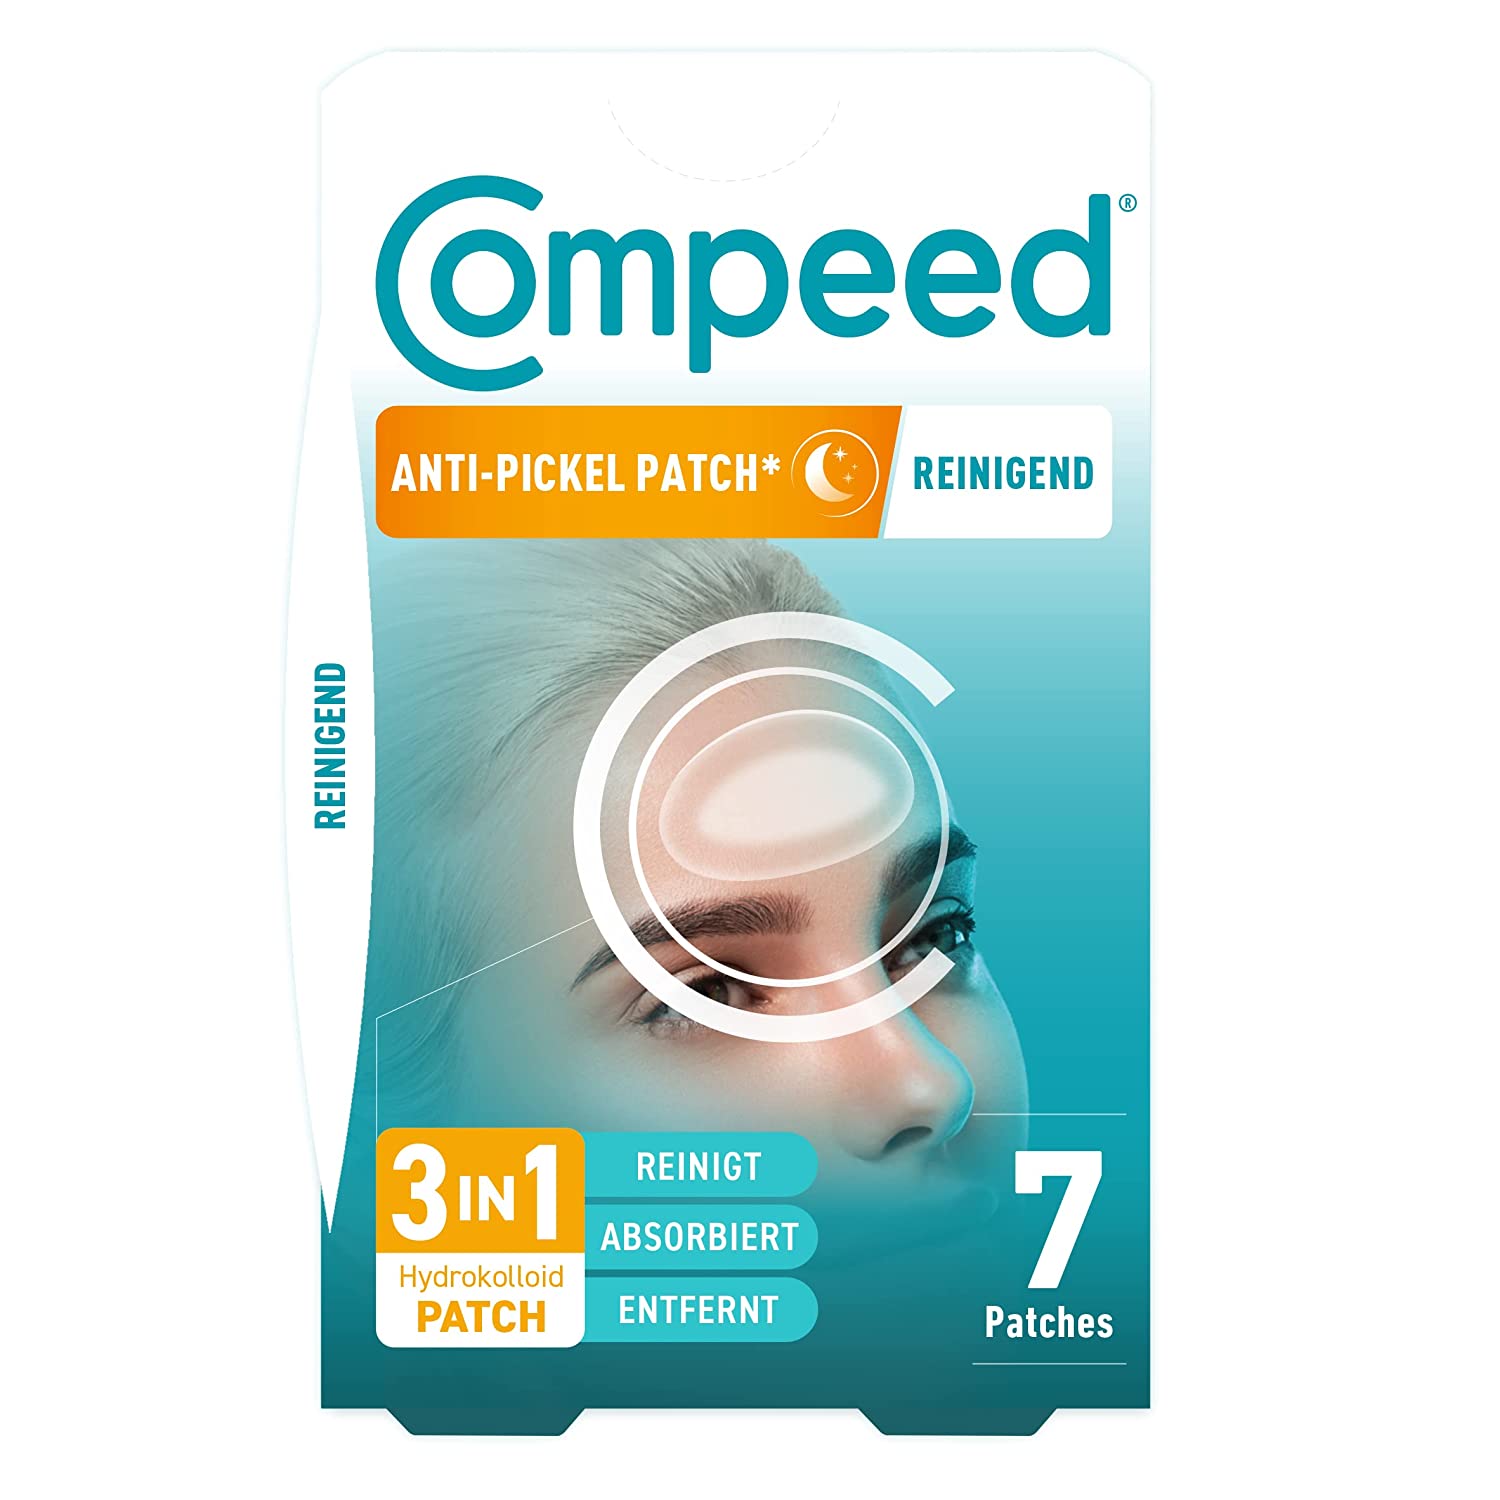 Compeed - Anti-Pimples* Patch Cleansing - Cleans, Absorbs and Removes - Hydrocolloid Pimple Patch* - Ideal for use at night - For larger areas such as the T-Zone 7 patches - 6.8 x 4.2 cm